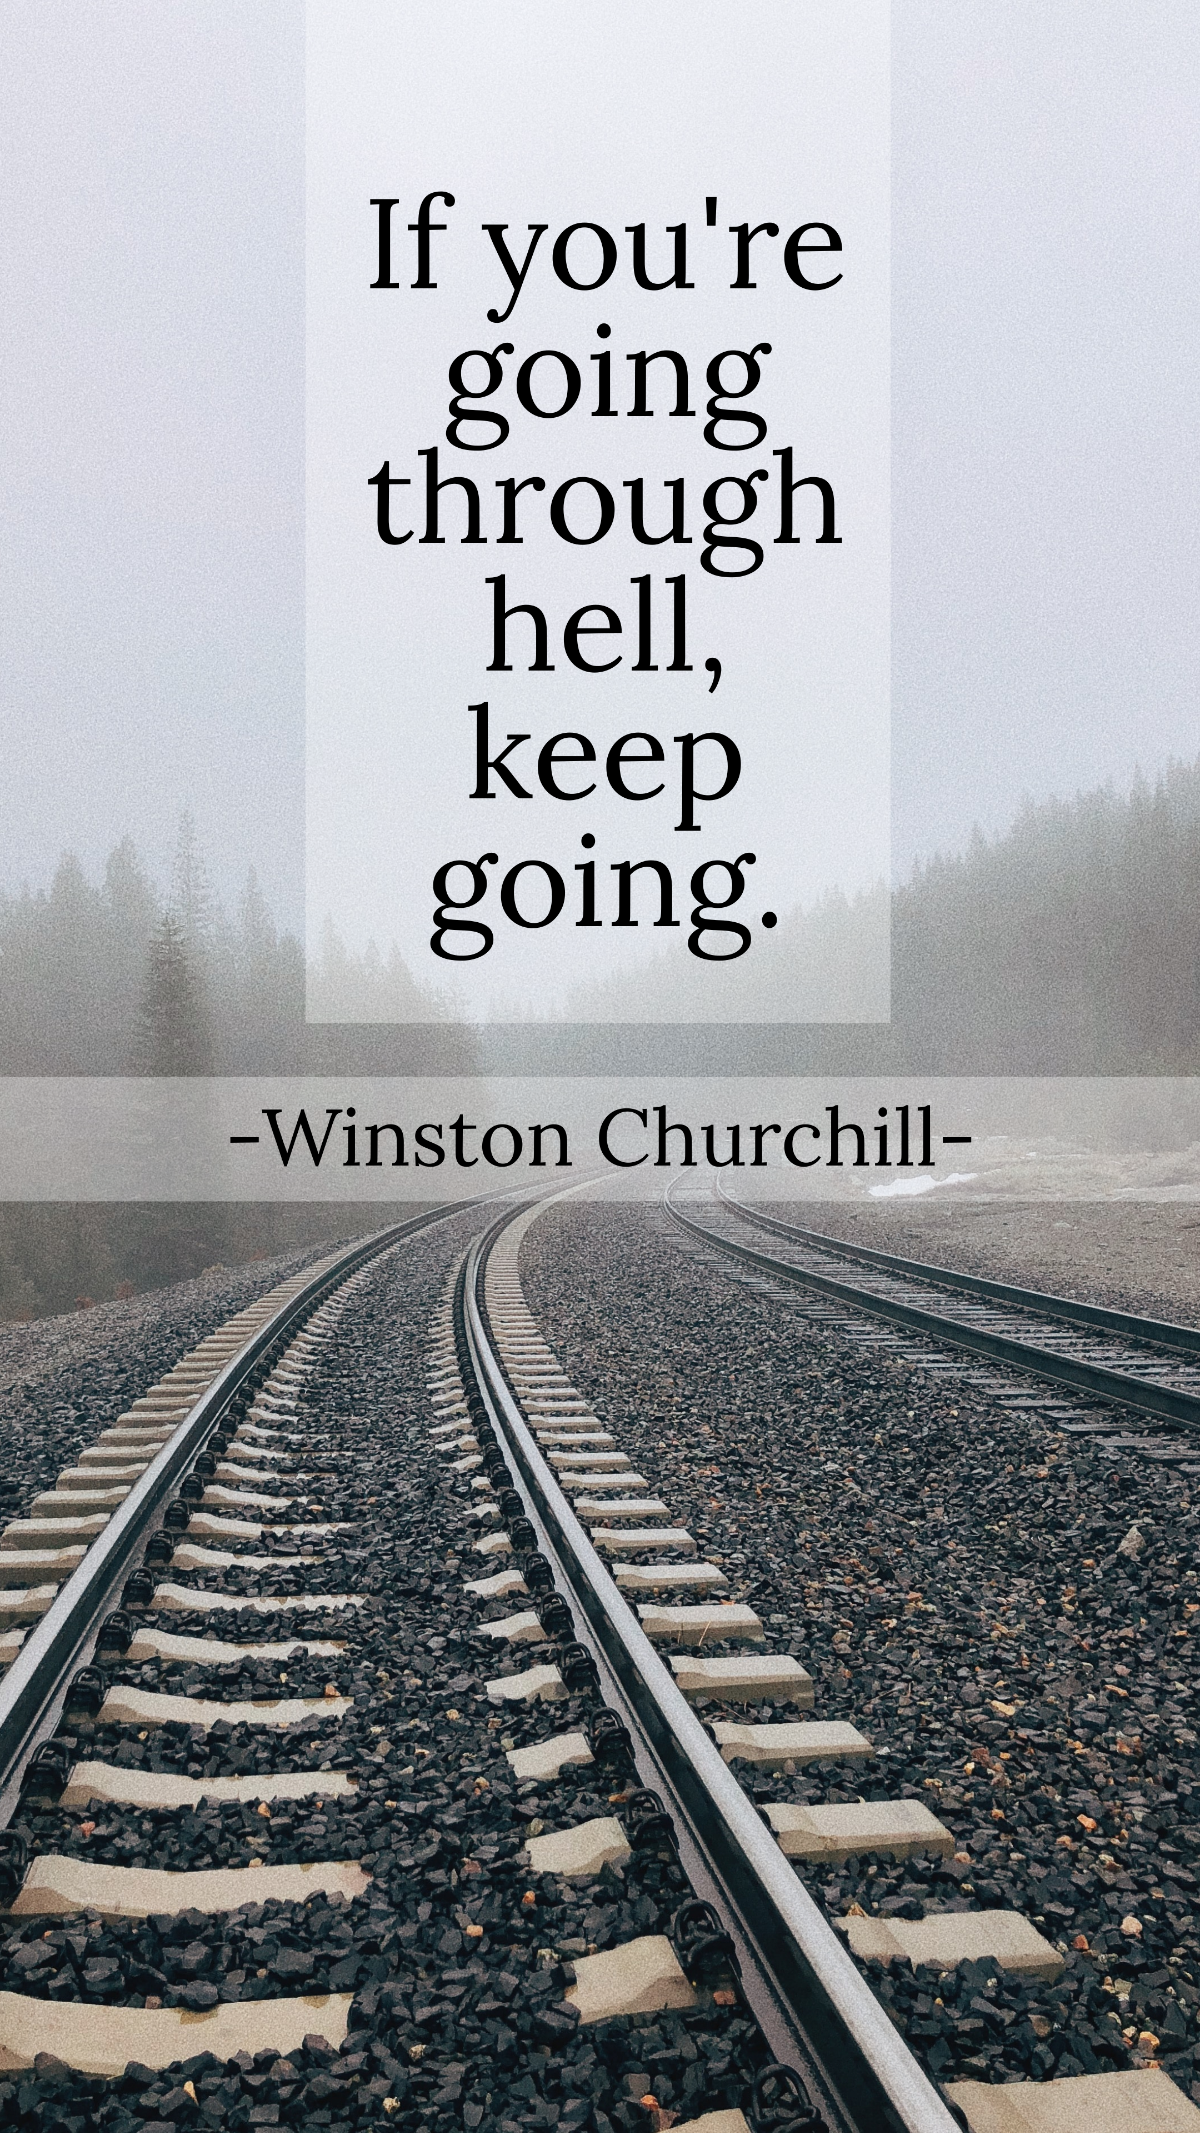 Winston Churchill - If you're going through hell, keep going.